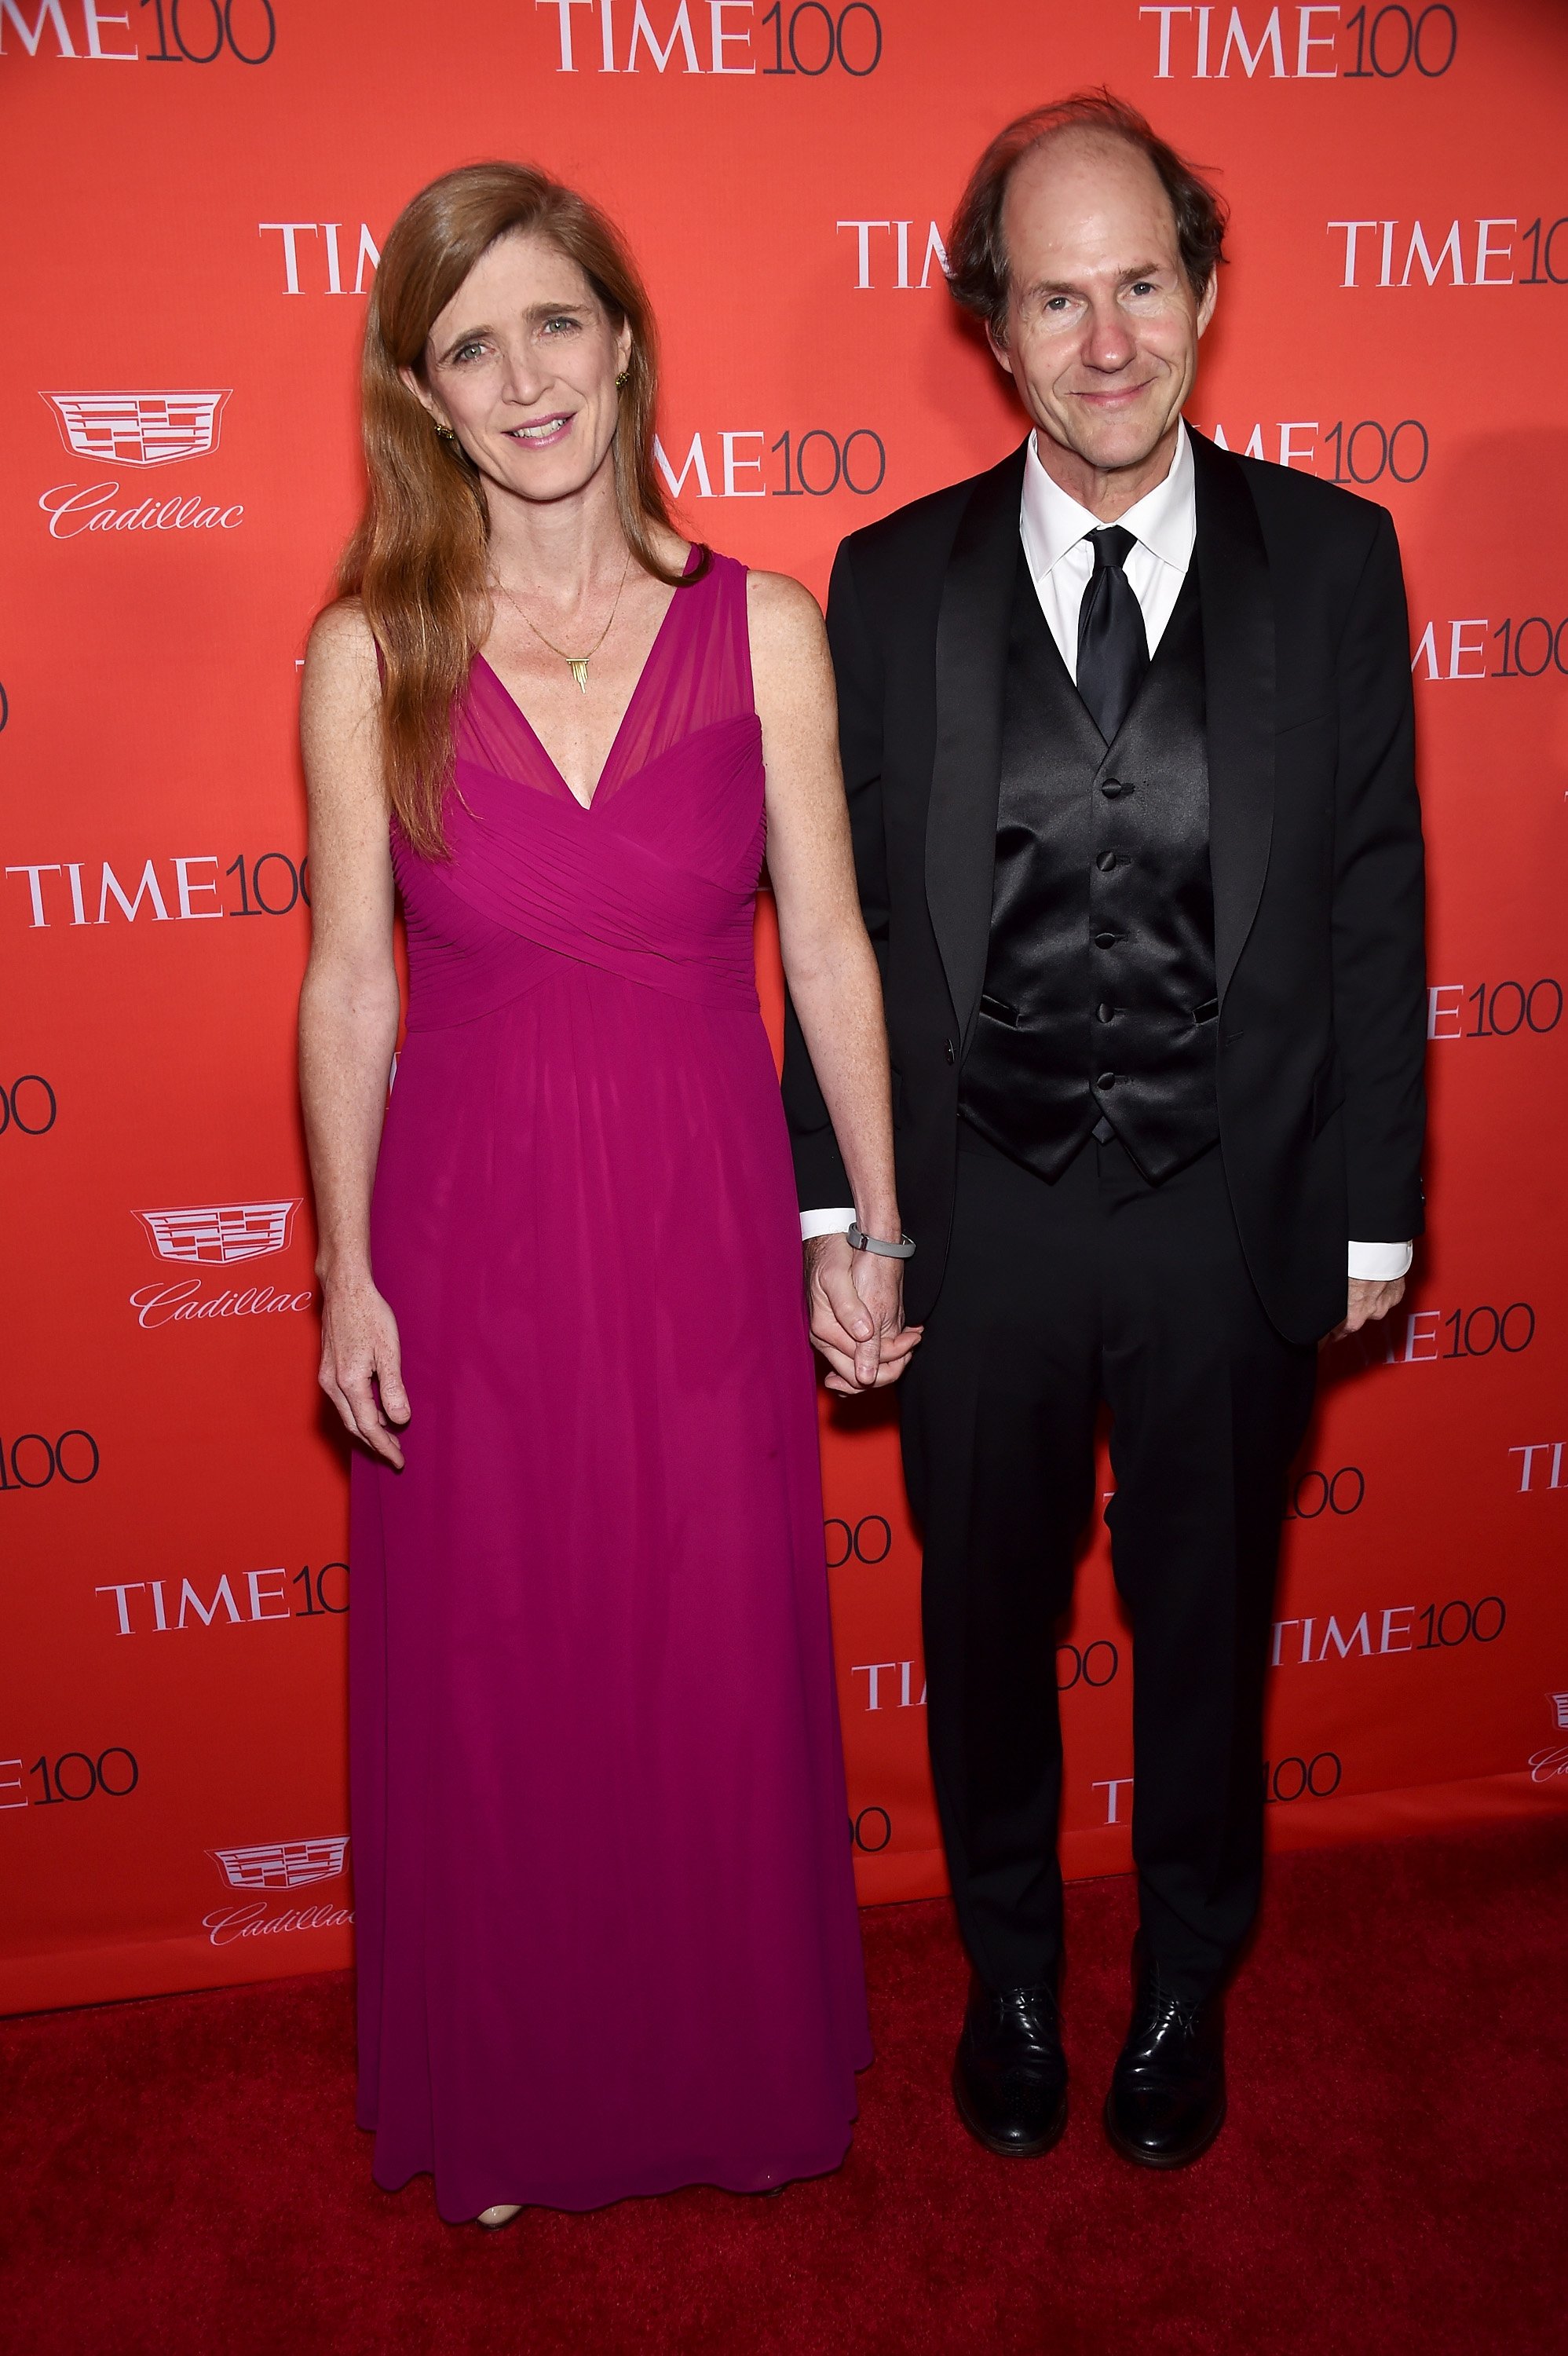 Samantha Power at the TIME 100 gala in New York on April 26, 2016.